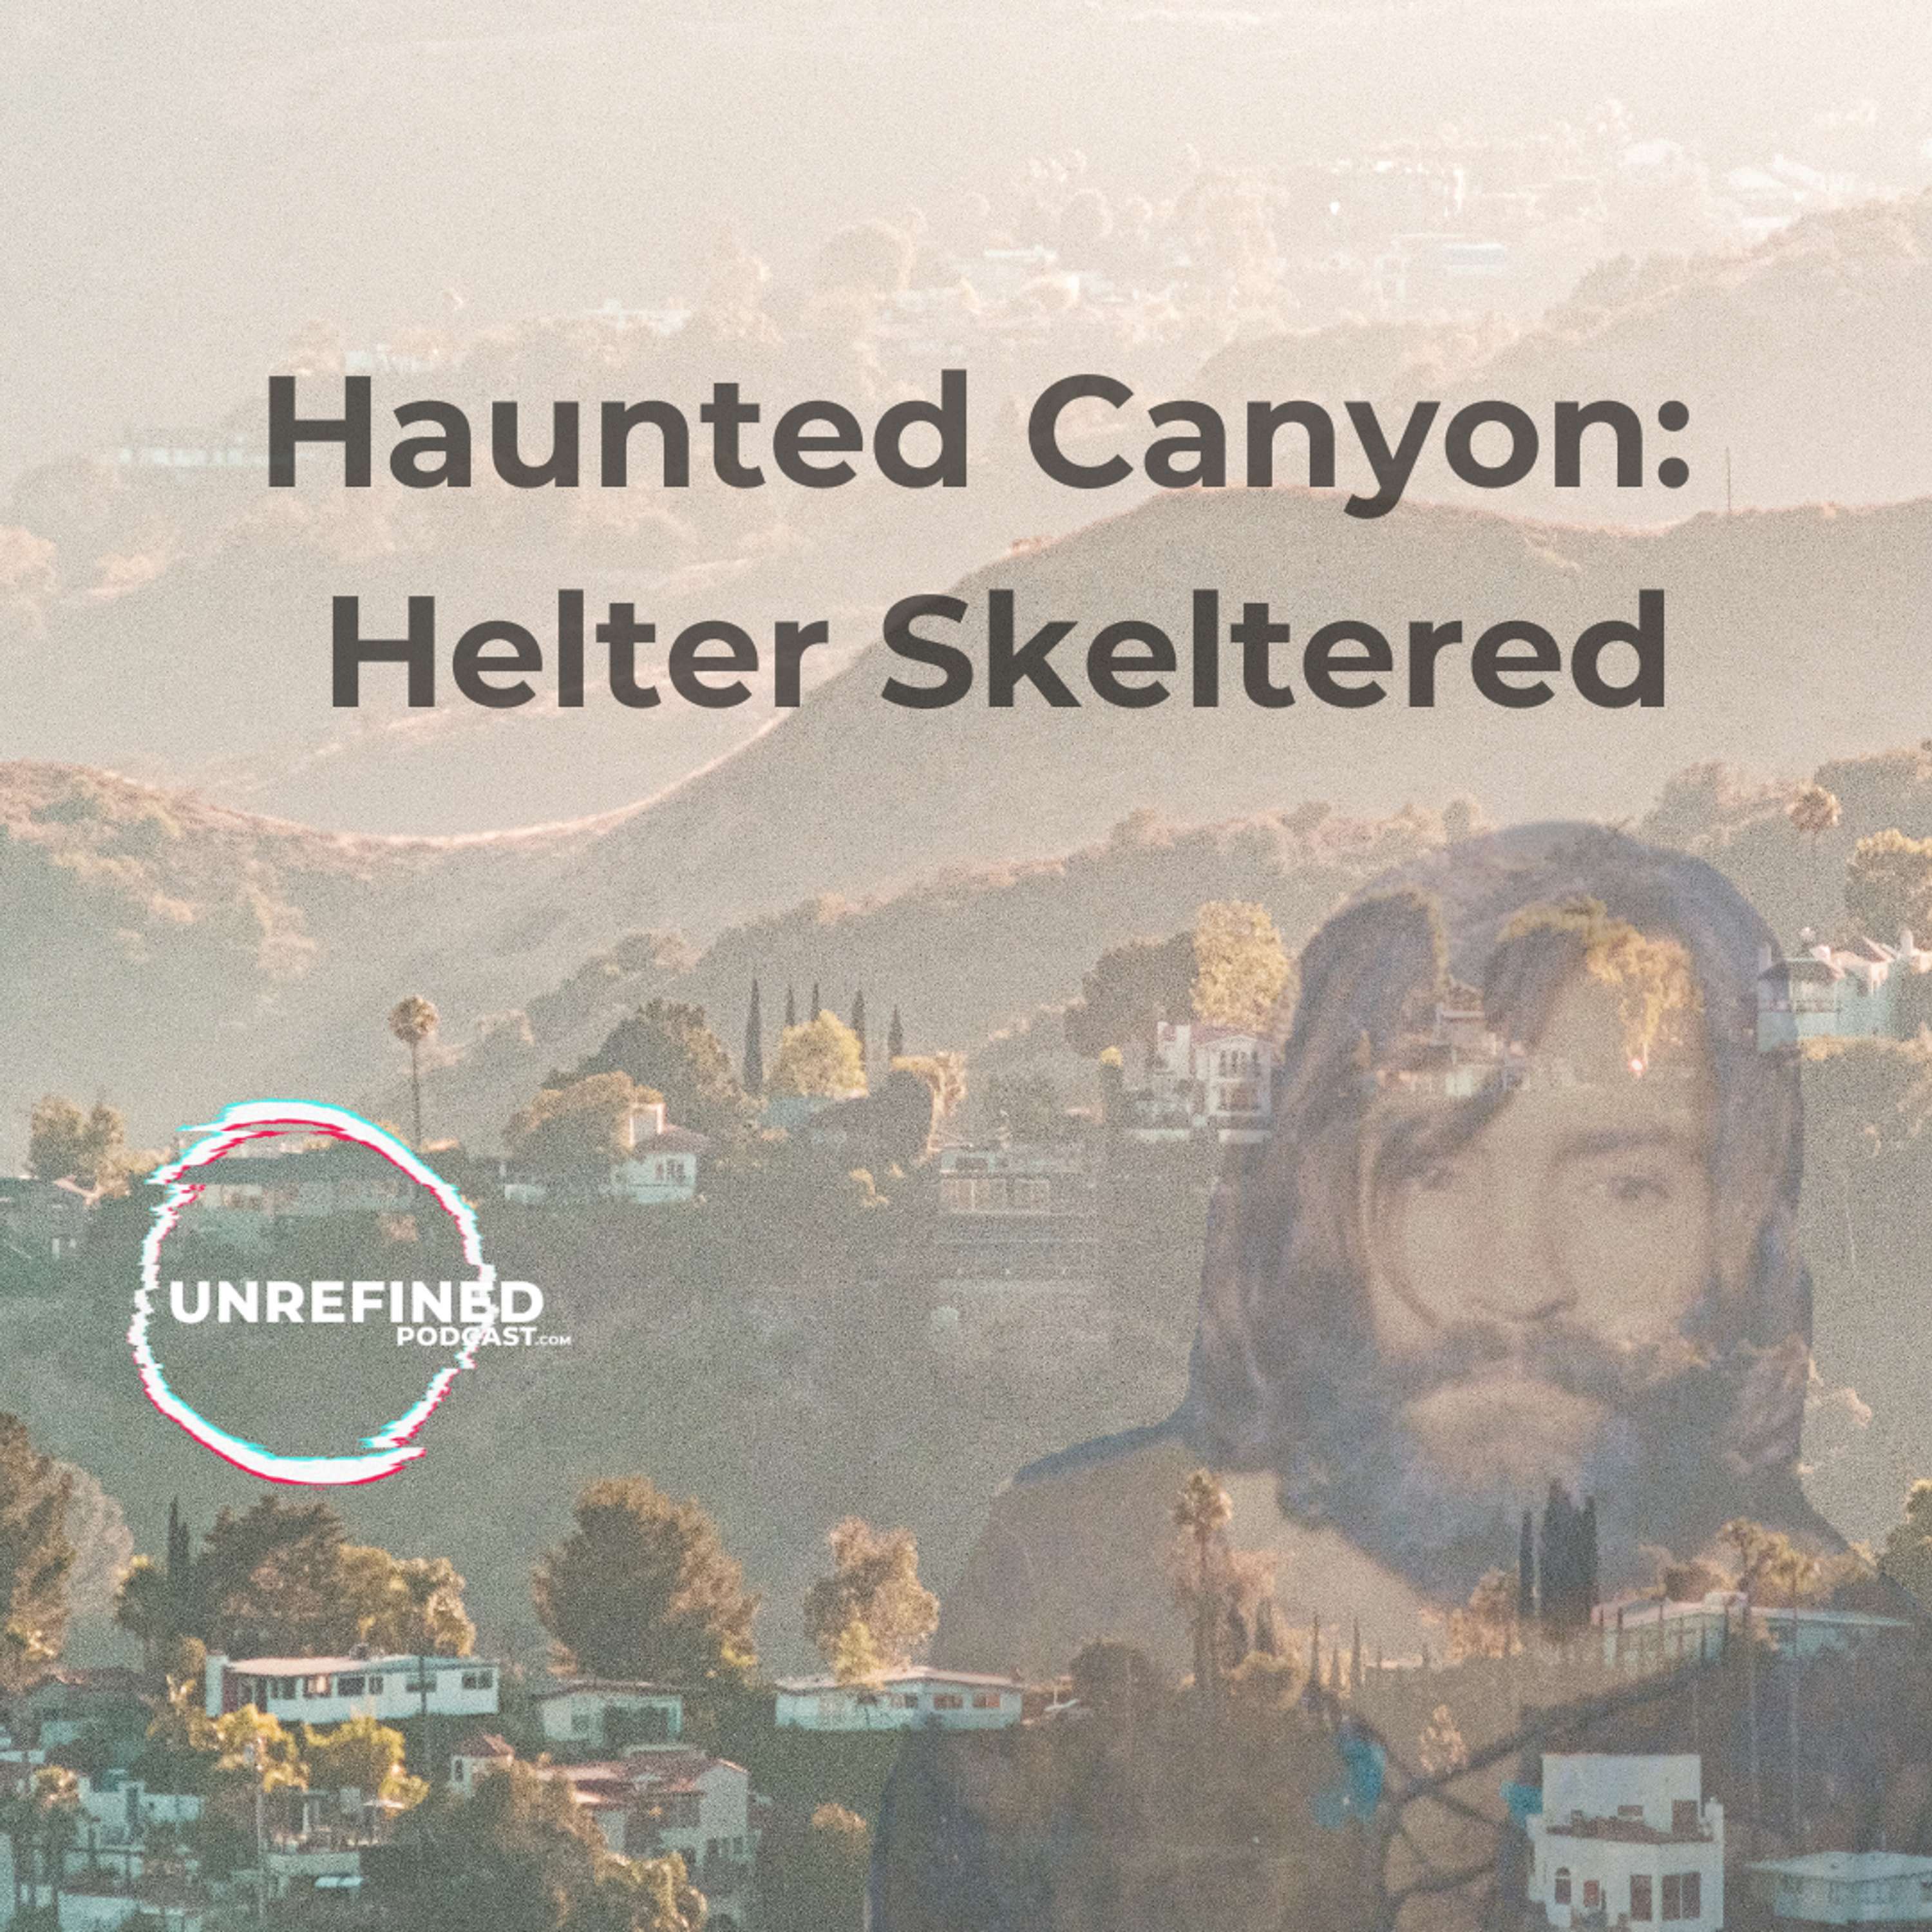 Haunted Canyon: Helter Skeltered